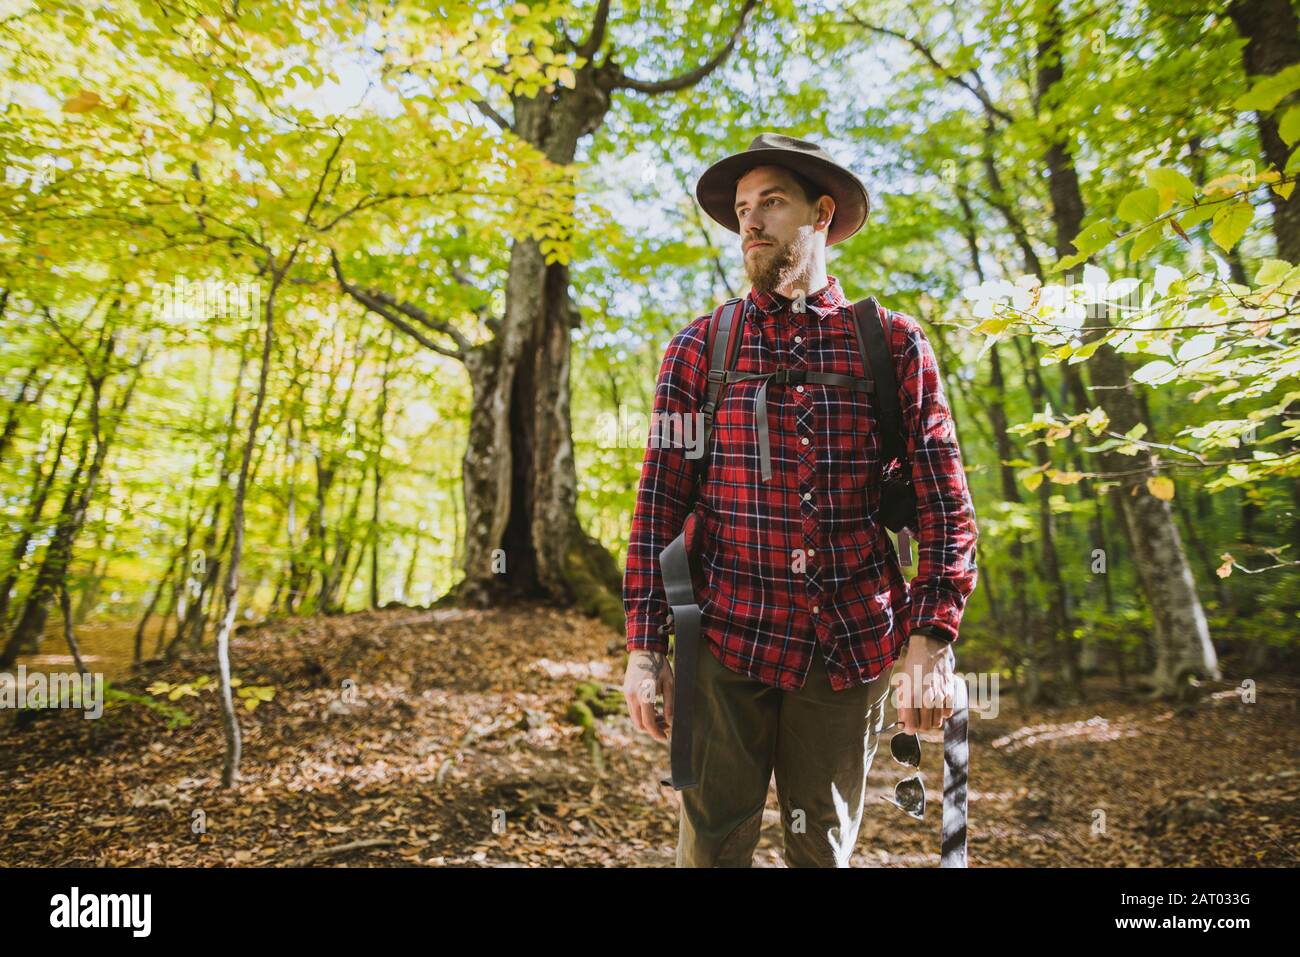 Man wearing red shirt in forest Stock Photo